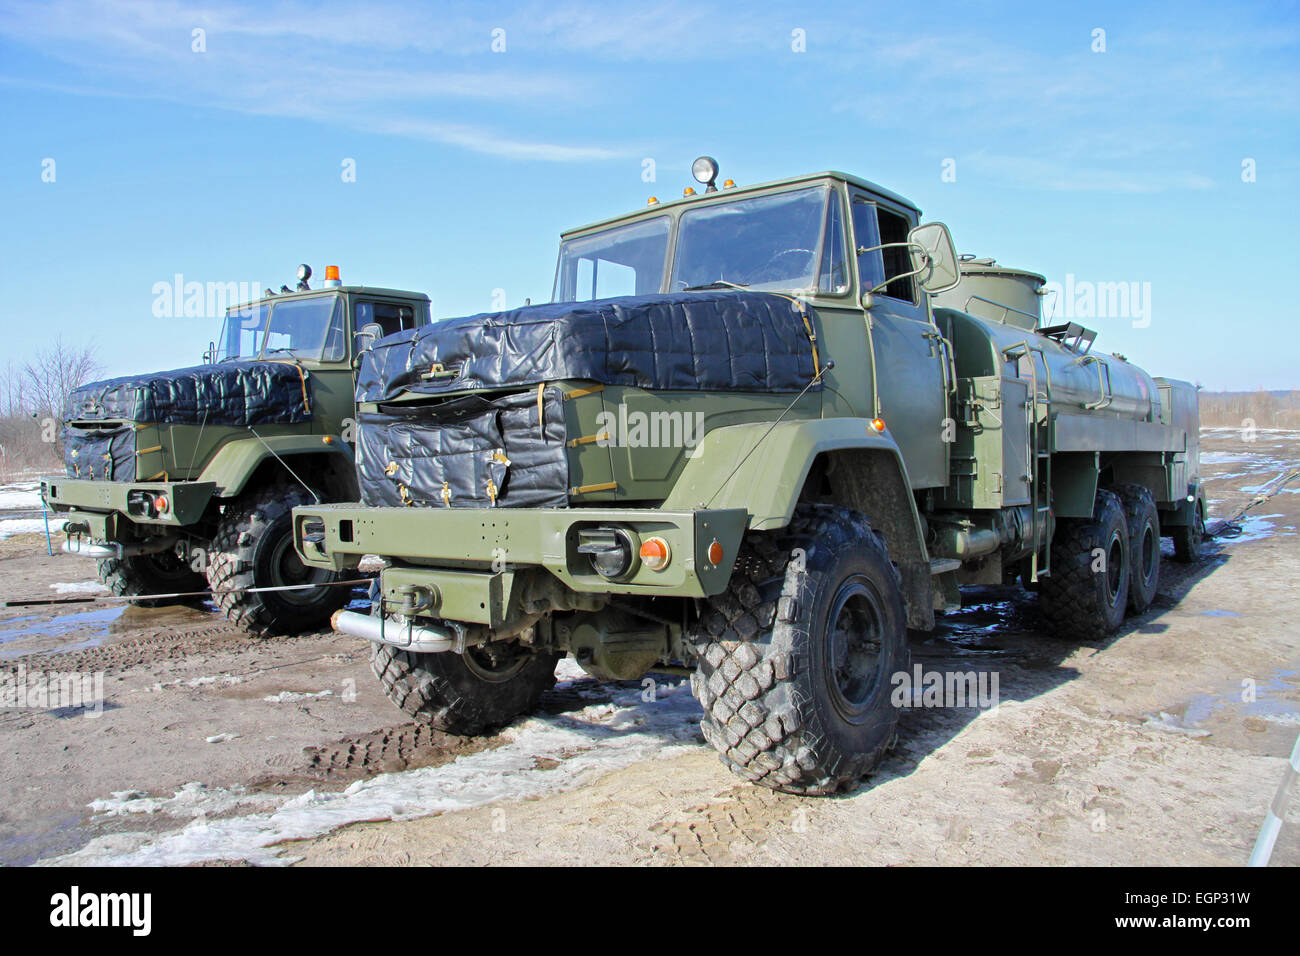 Army Tanker Truck High Resolution Stock Photography and Images - Alamy